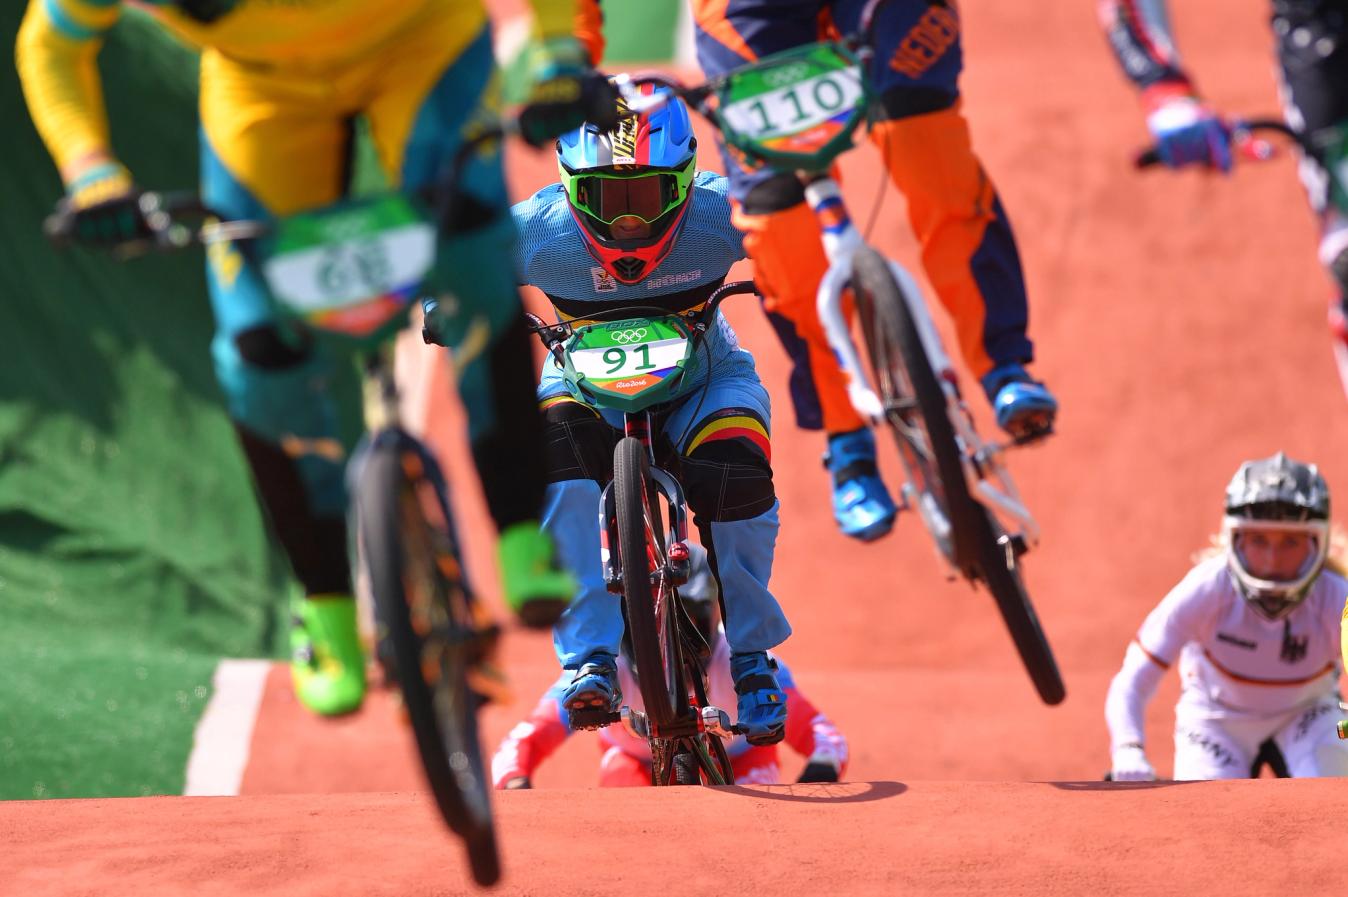 BMX racers have to put serious power through their pedals 